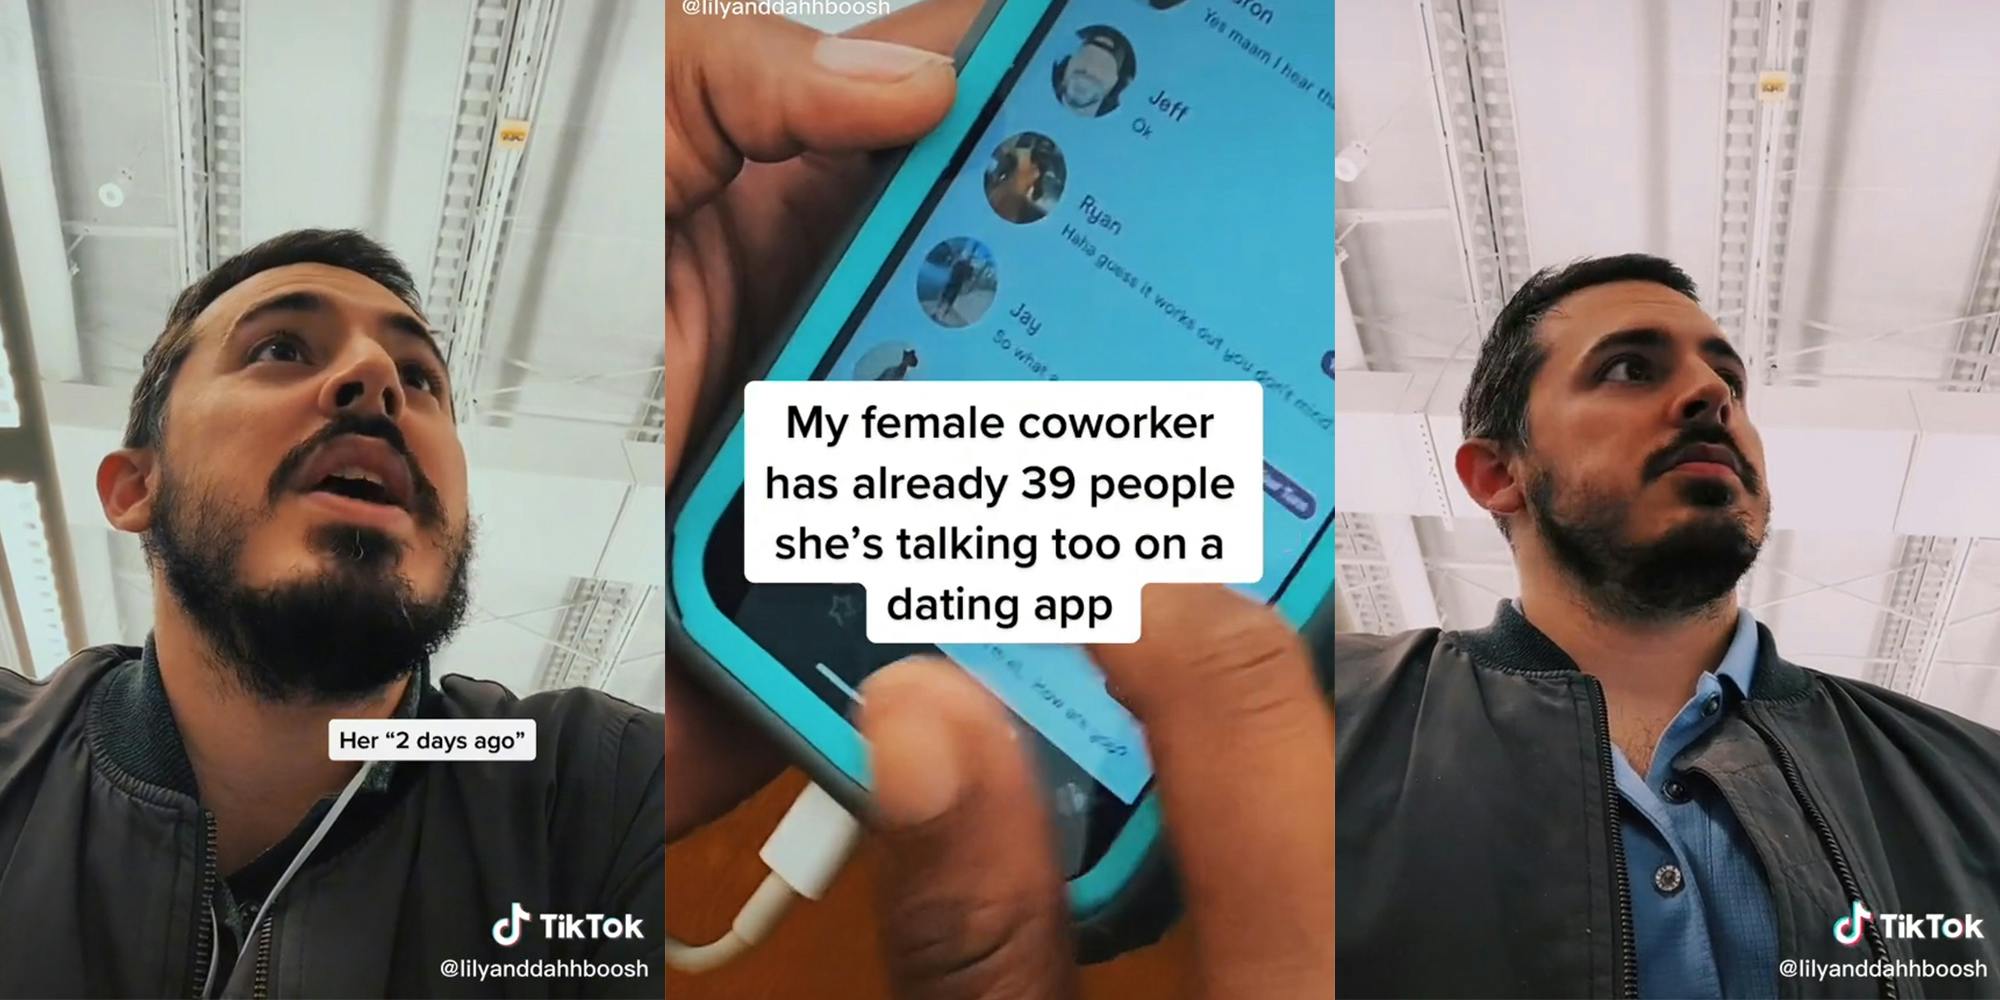 man in office with caption "Her *2 days ago" (l) woman holding phone with dating app and caption "My female coworker has already 39 people she's talking too on a dating app" (c) man in office with look of disbelief(r)